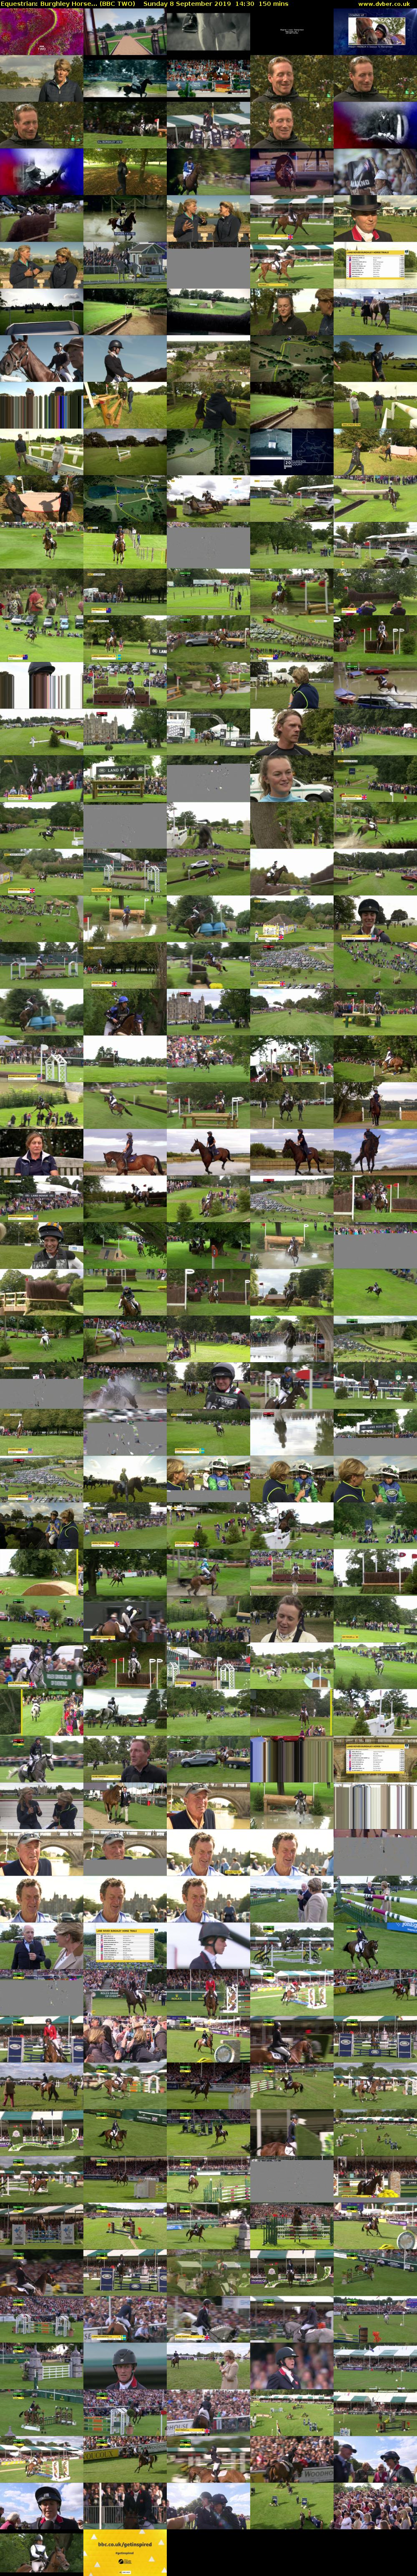 Equestrian: Burghley Horse... (BBC TWO) Sunday 8 September 2019 14:30 - 17:00